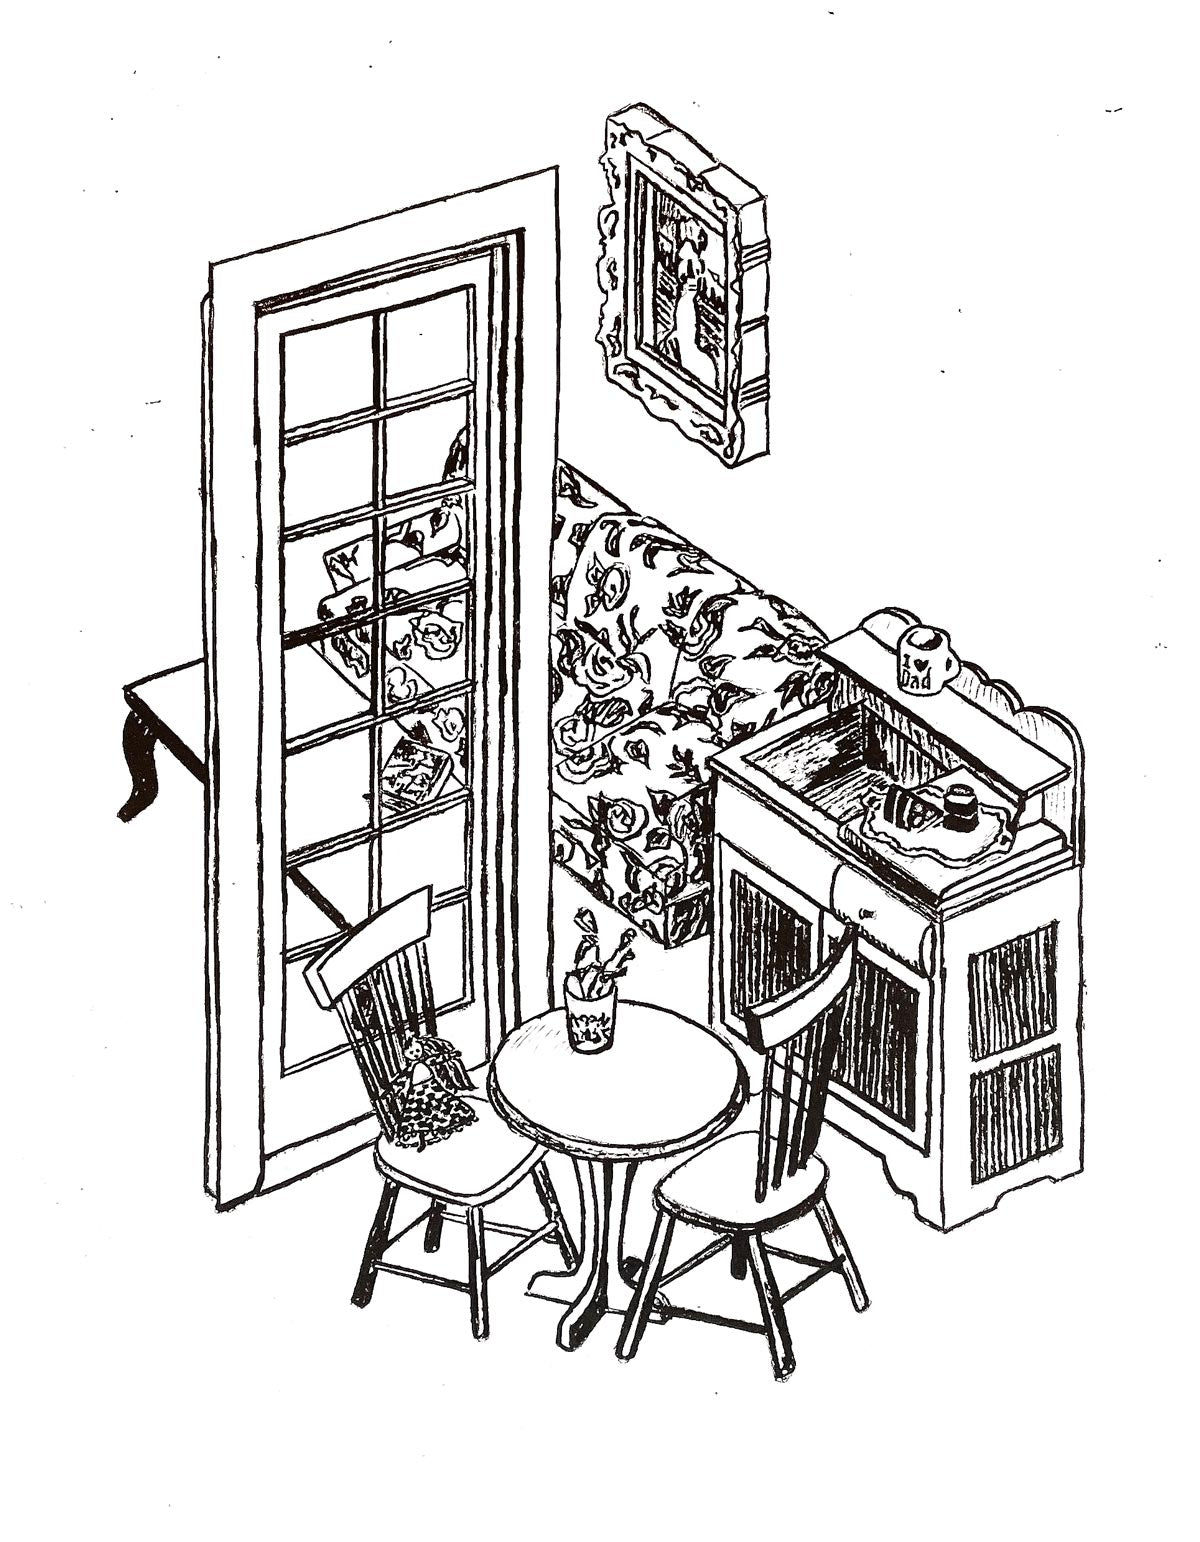 A lithograph black-and-white drawing of a collection of dollhouse furniture drawn in isometric style